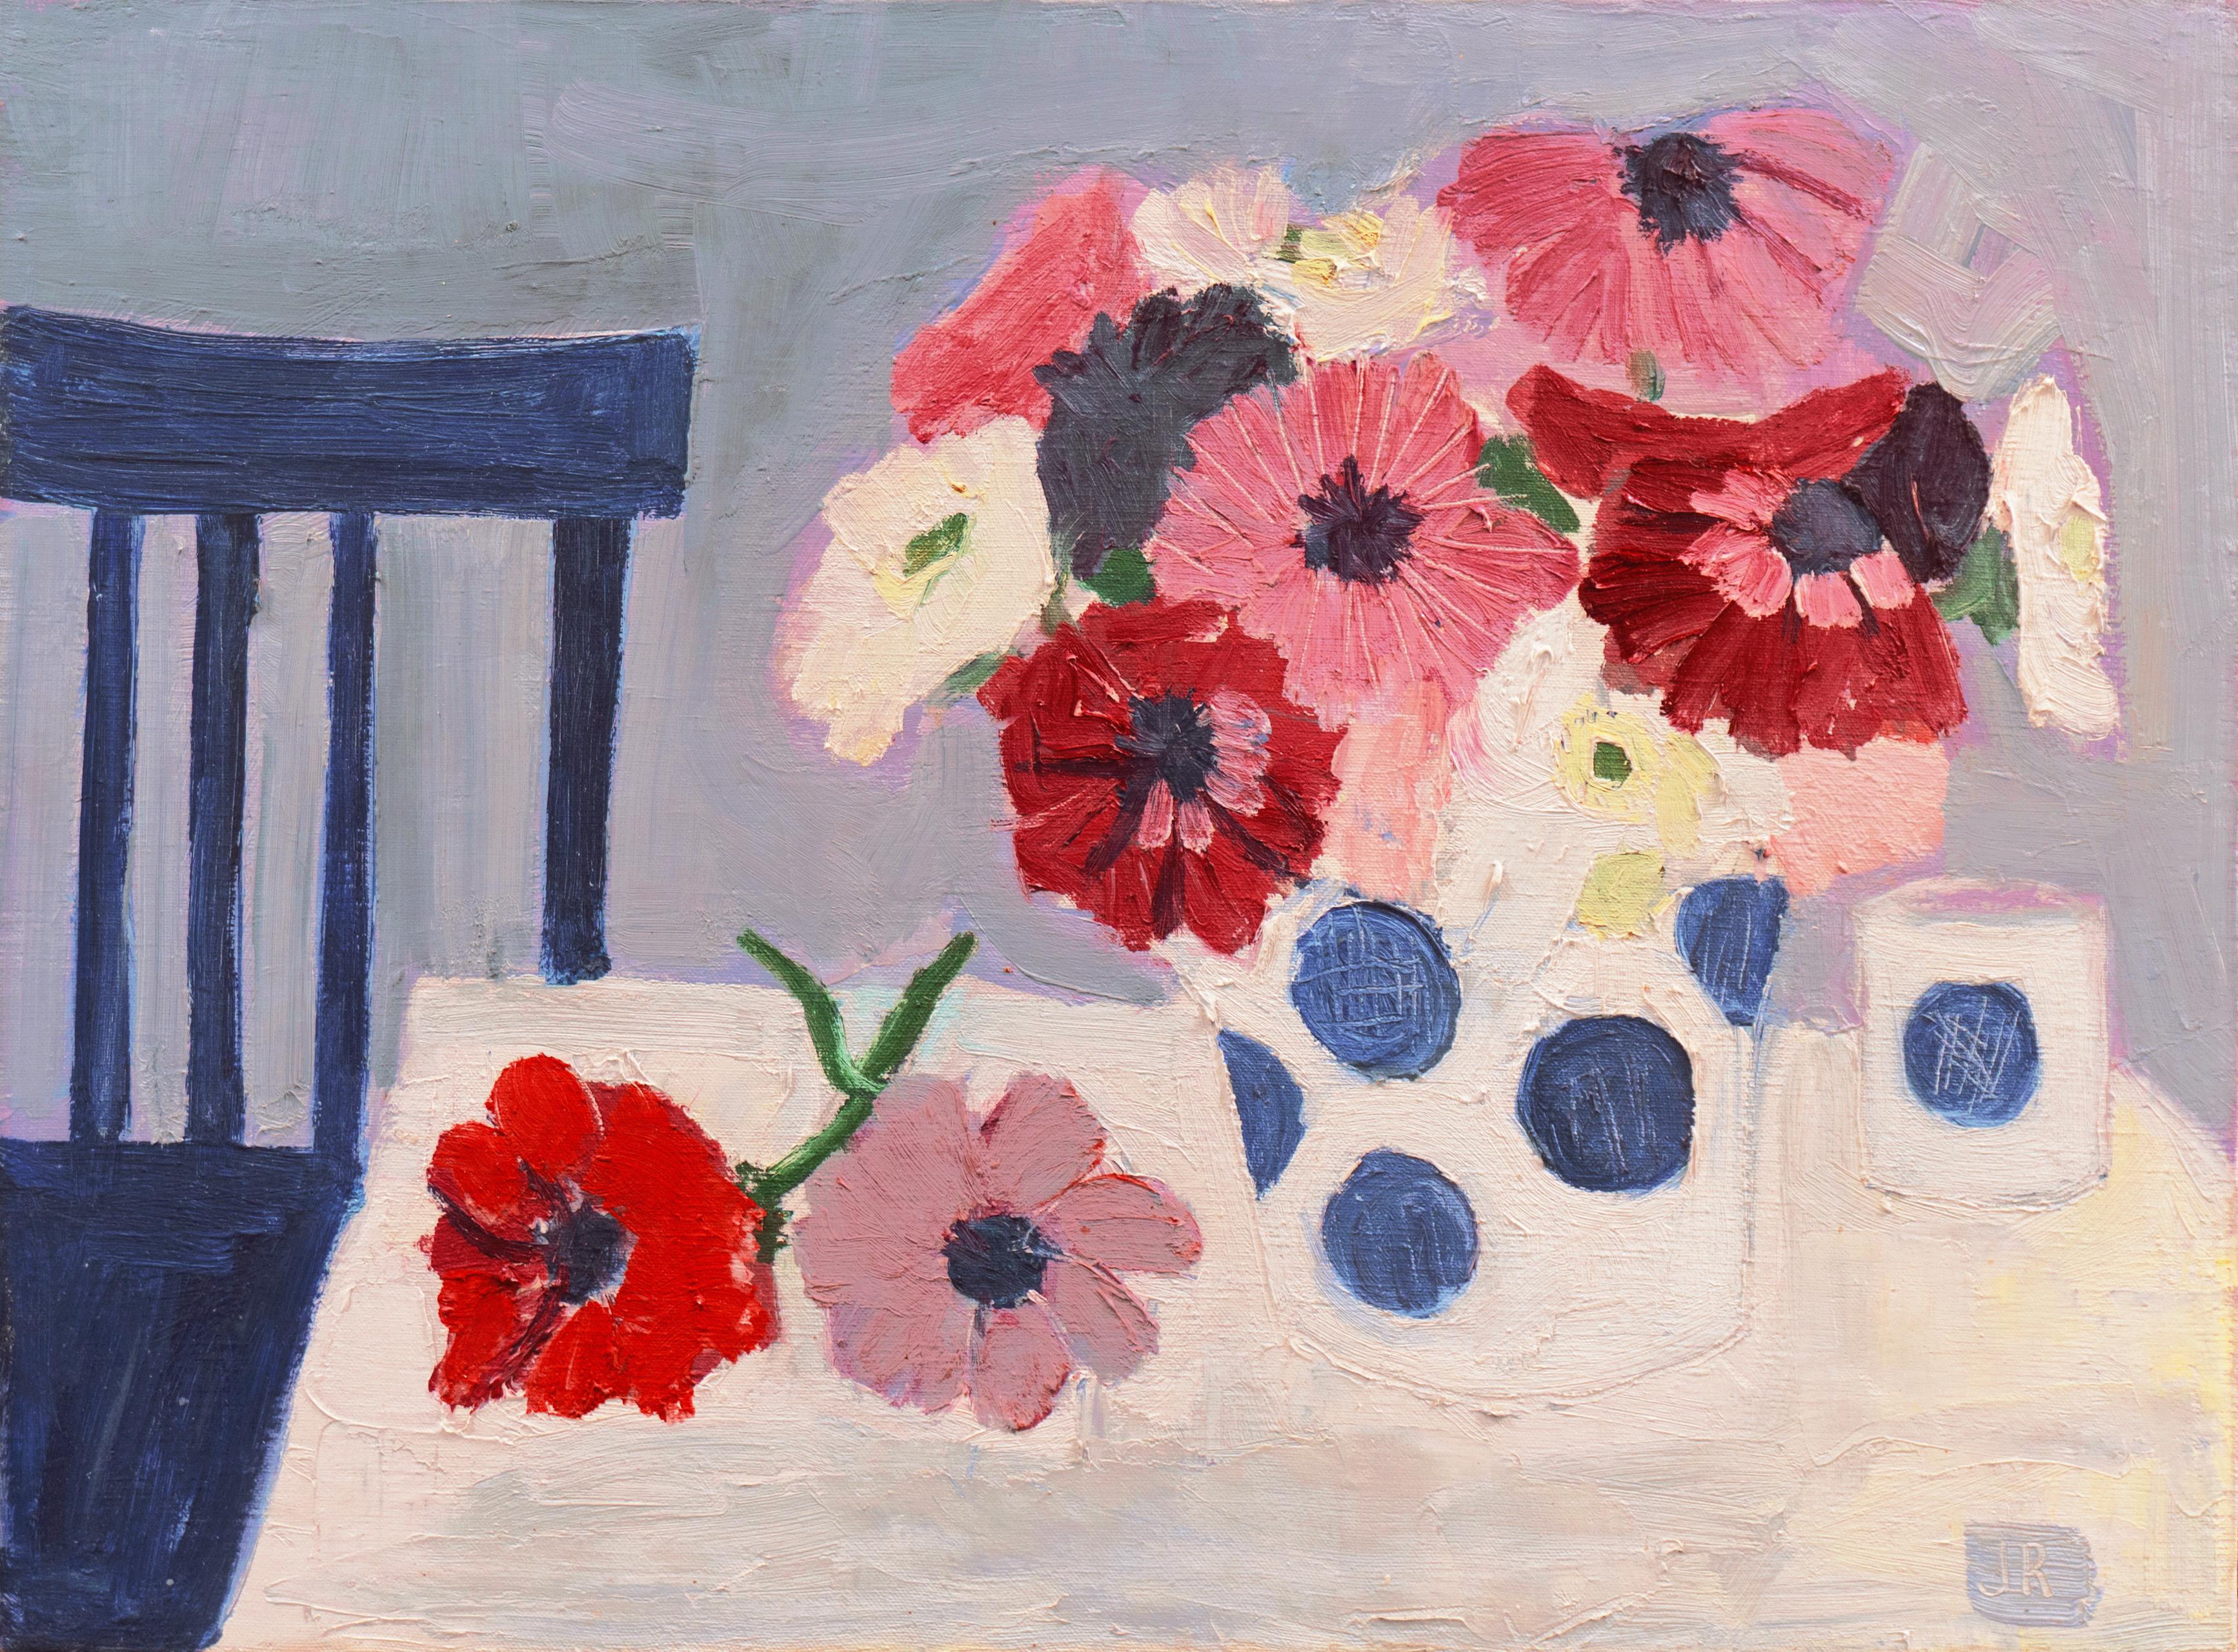 Joan Ridgway Raguenvan (American, 20th century) Still-Life Painting - 'Still Life with Blue Chair and Daisies', San Francisco Bay Area, Woman Artist